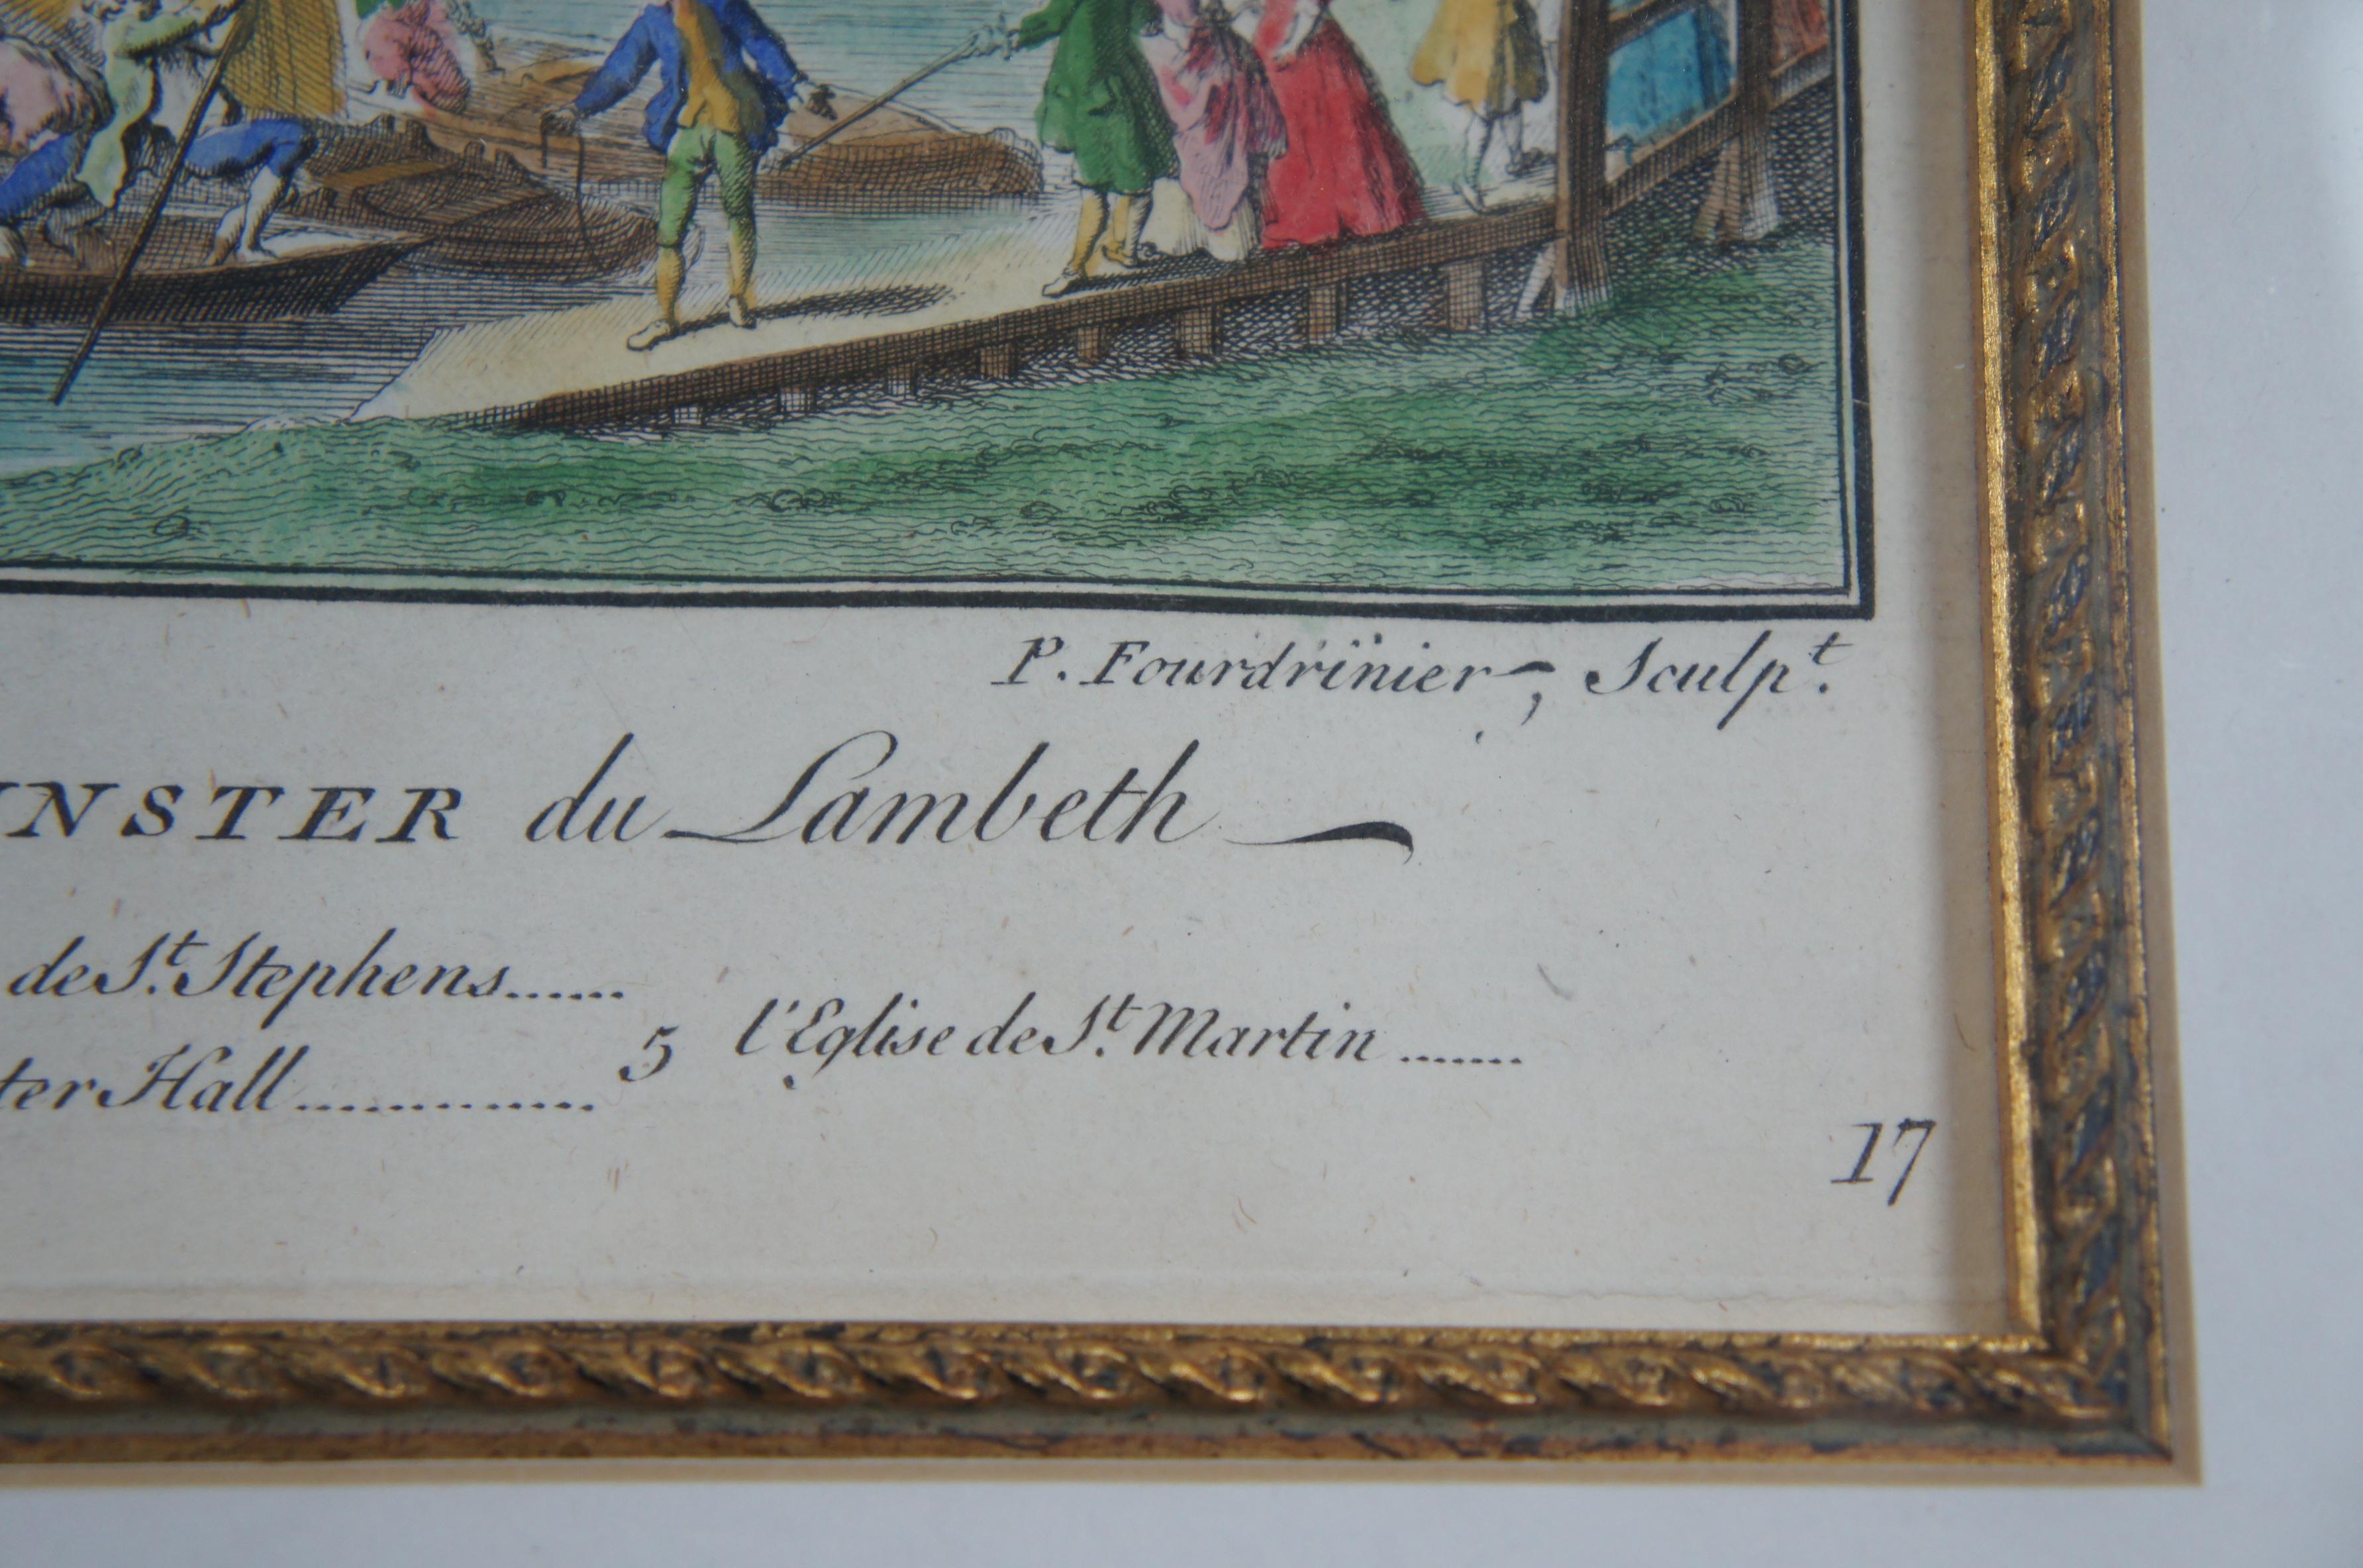 Antique 1755 Copperplate Engraving Westminster Bridge Lambeth Survey of London In Good Condition For Sale In Dayton, OH